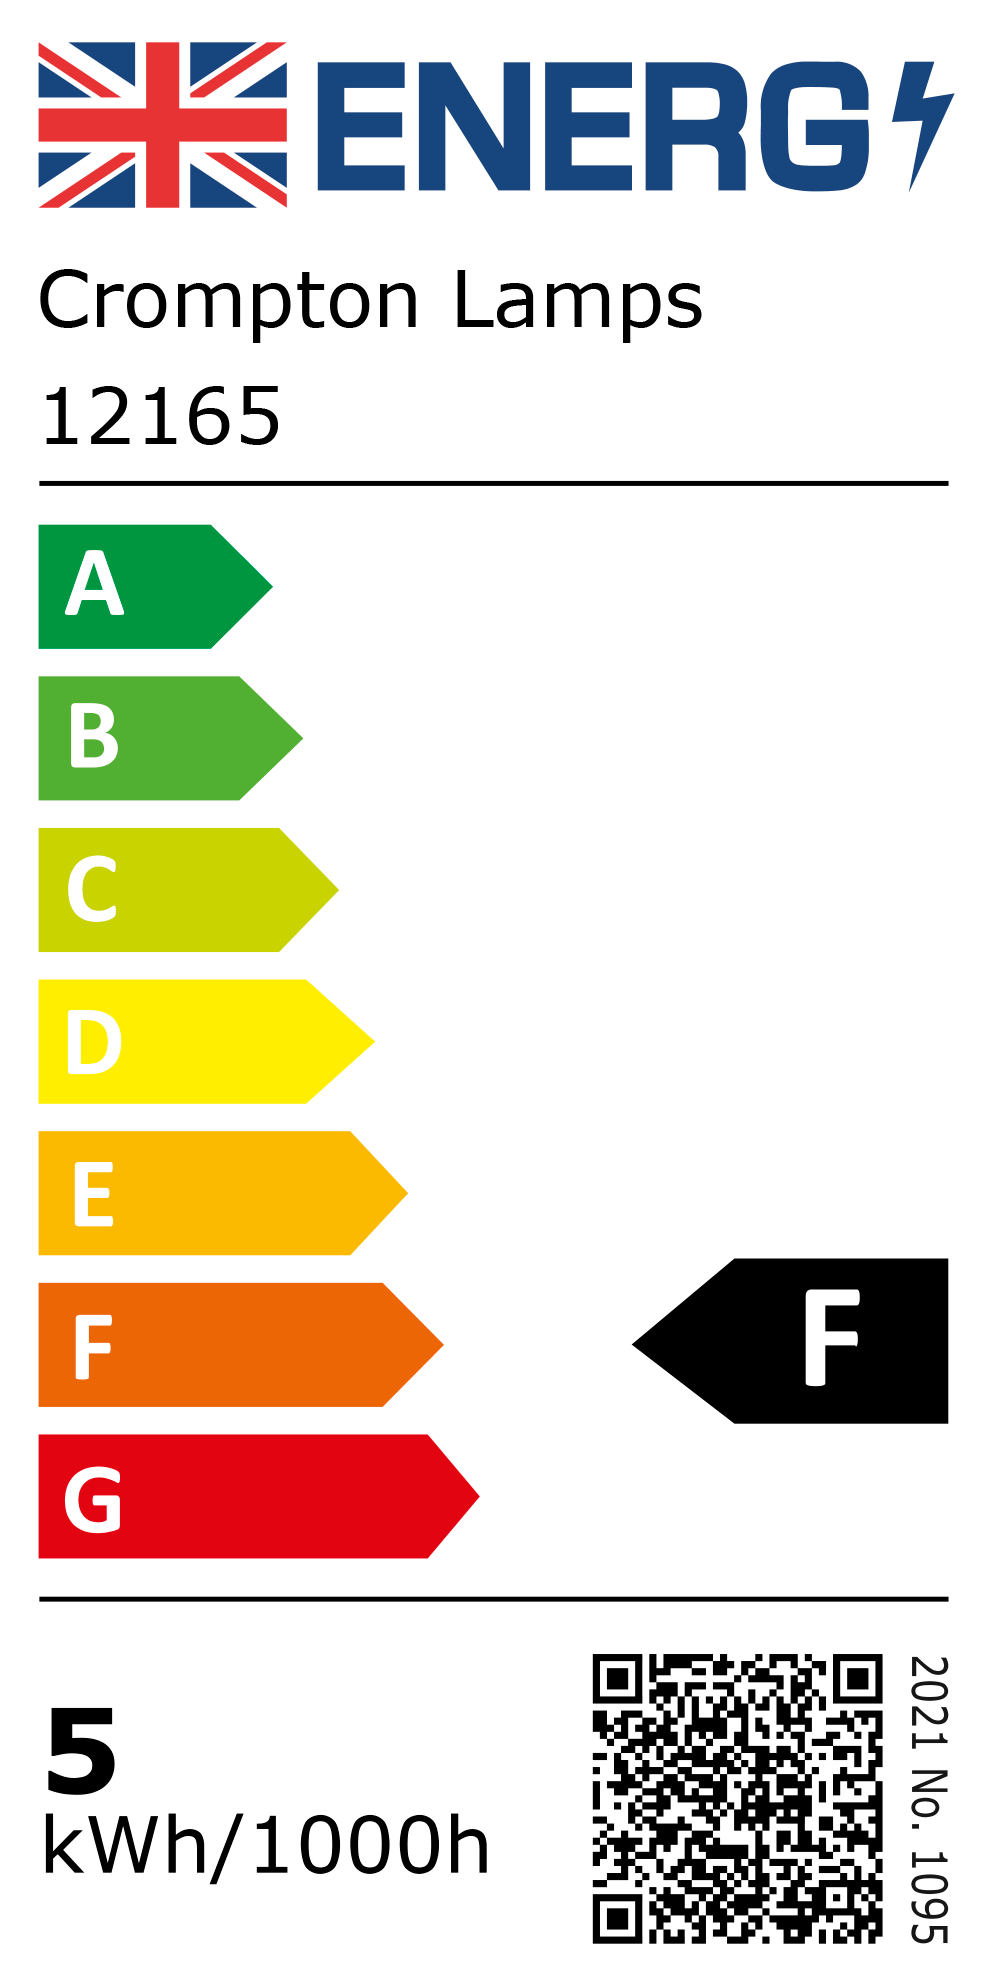 New 2021 Energy Rating Label: Stock Code 12165